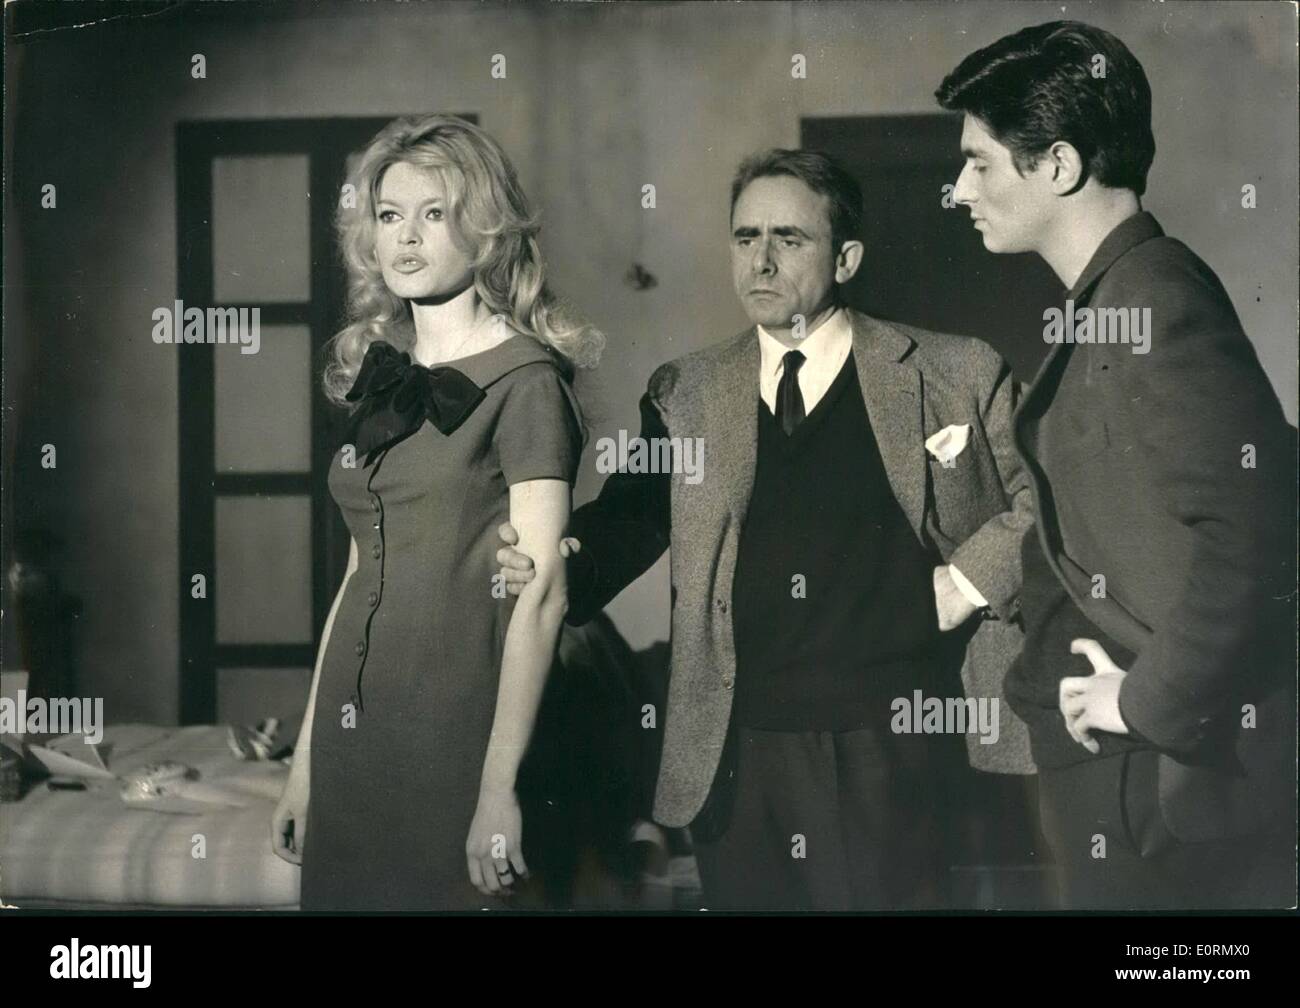 Mar. 03, 1960 - To have new partner for love scenes A new partner for Brigitte Bardot's love scene was tested at the boulogne-Billancourt (Paris) studio yesterday the young actor selected for this - highly pleasant - part is Sami Frey who starred and her new partner Sami Frey being ''Briefed'' by the film Director Clouzot. Stock Photo